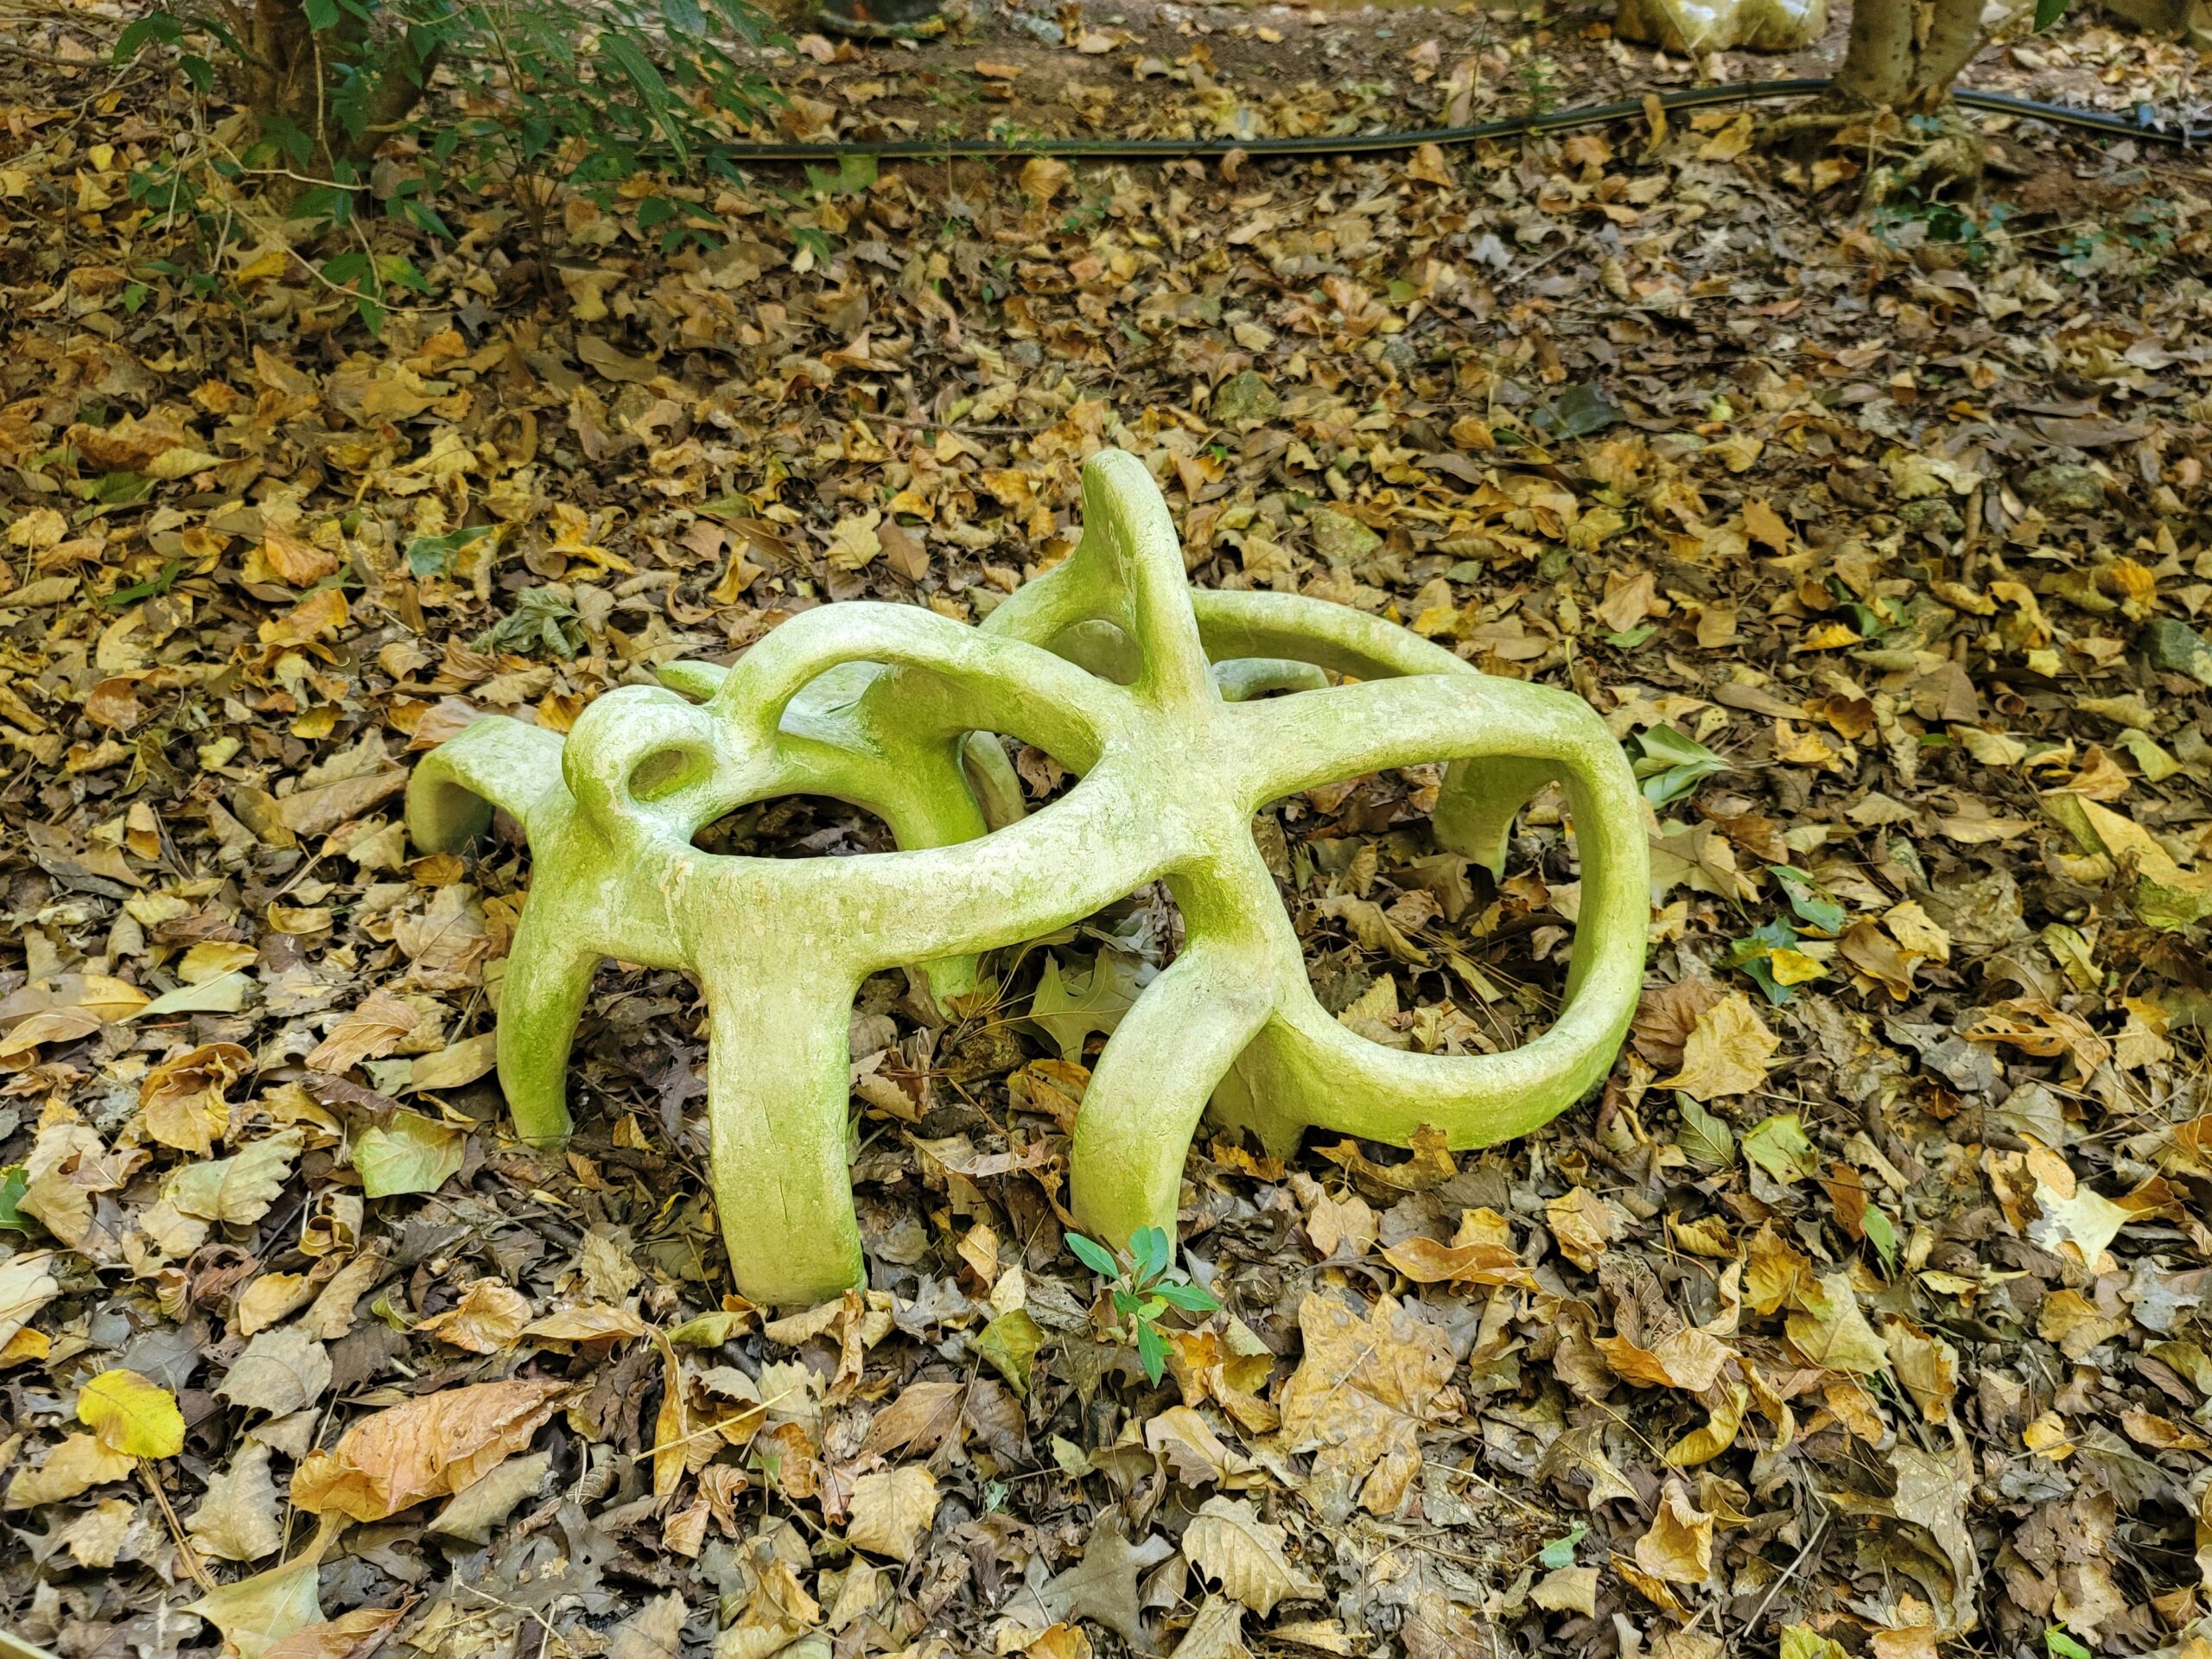 Green-yellow abstract sculpture with yellow and brown leaves